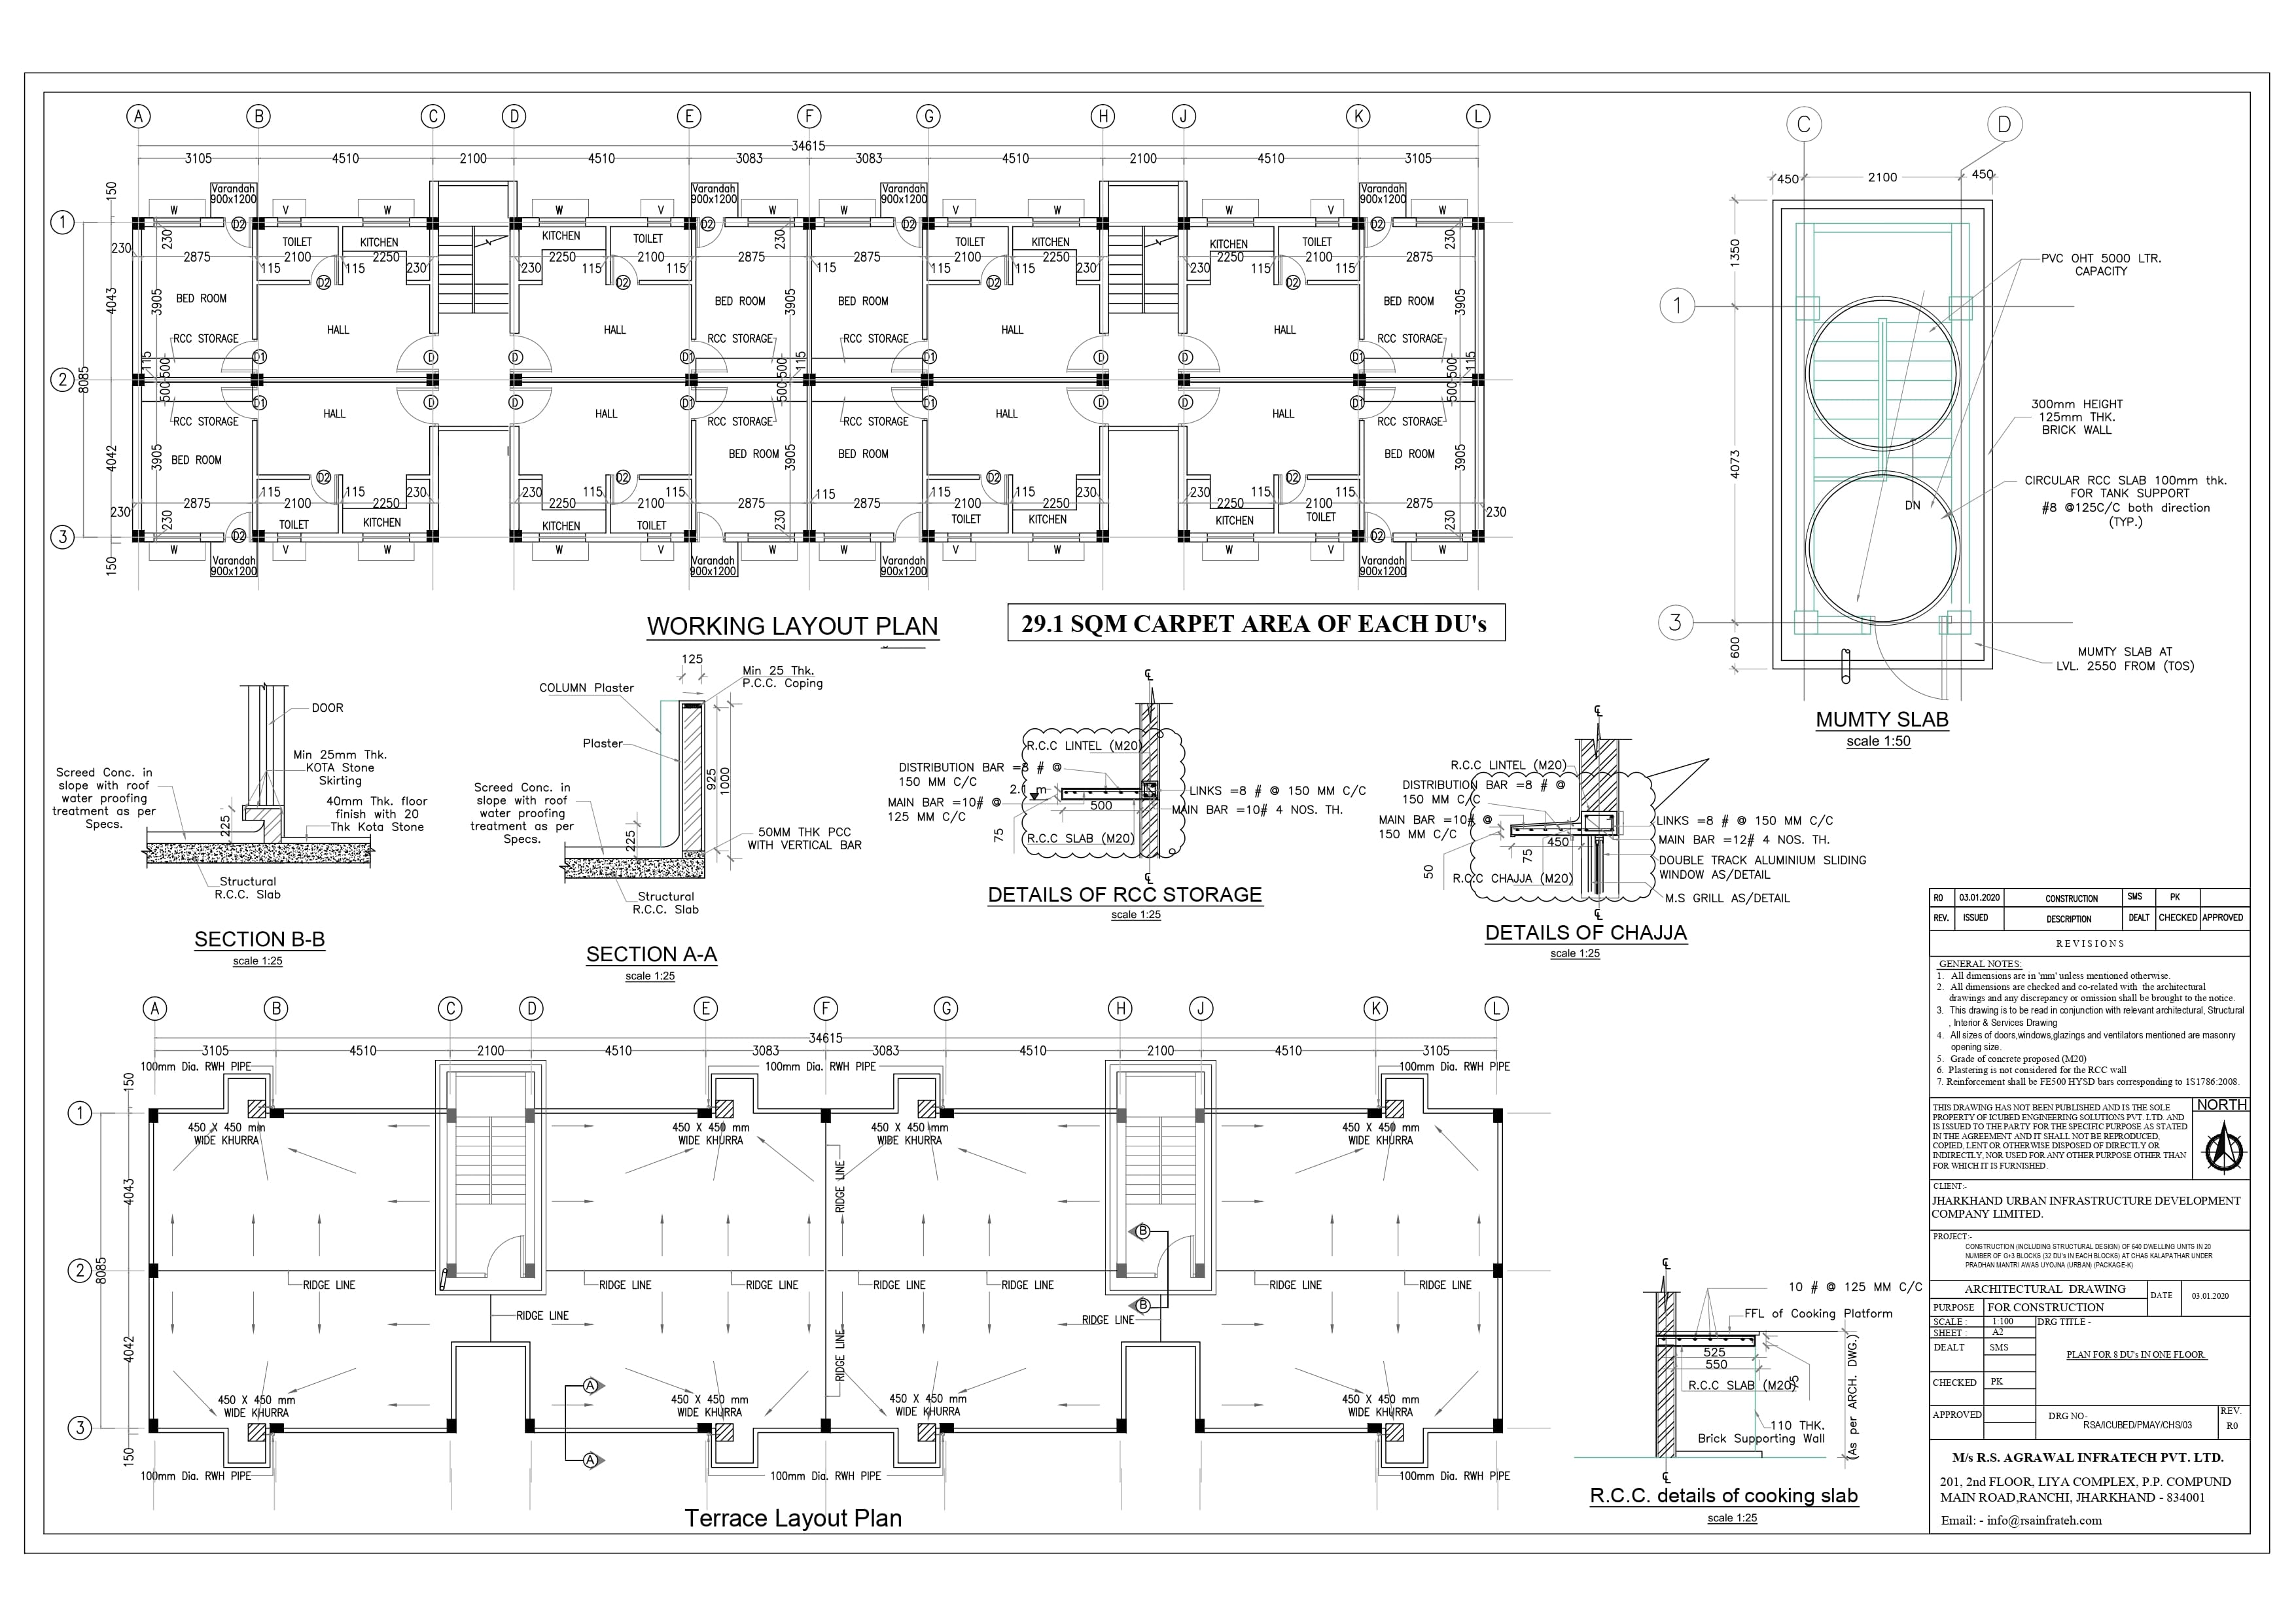 Floor Plan, Terrace Layout Plan And Details